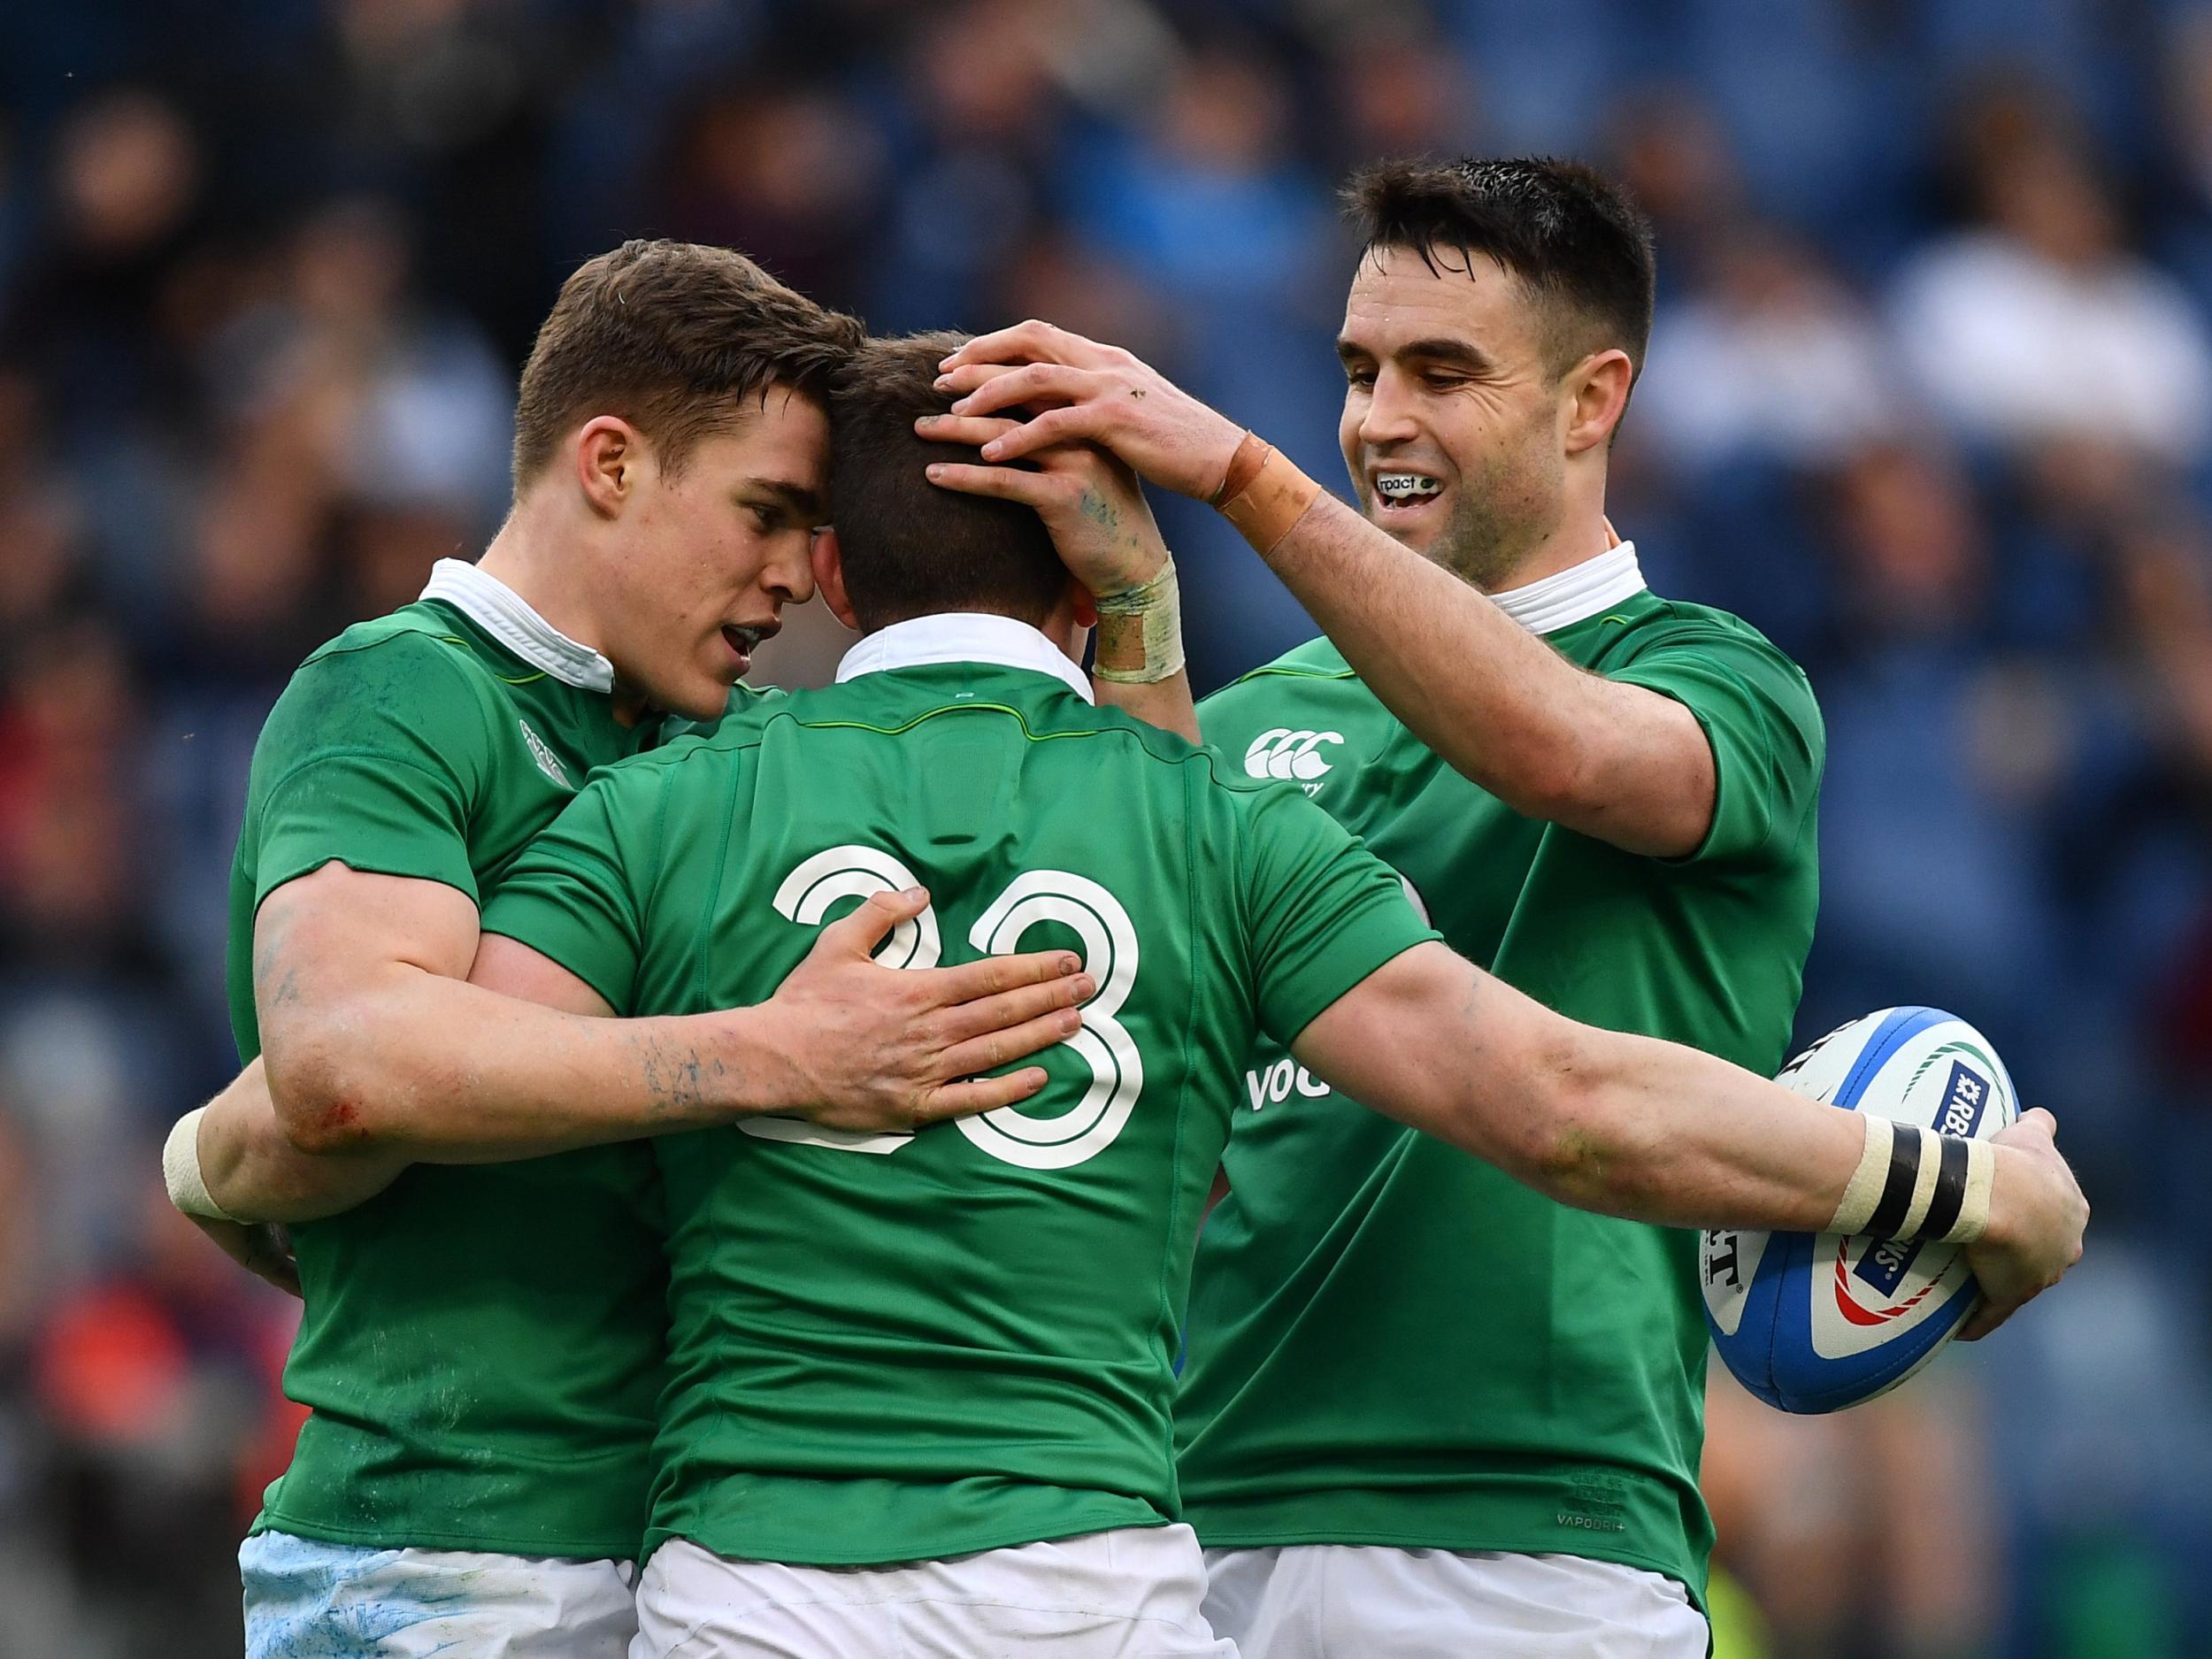 Ireland delivered a record-breaking performance away to Italy